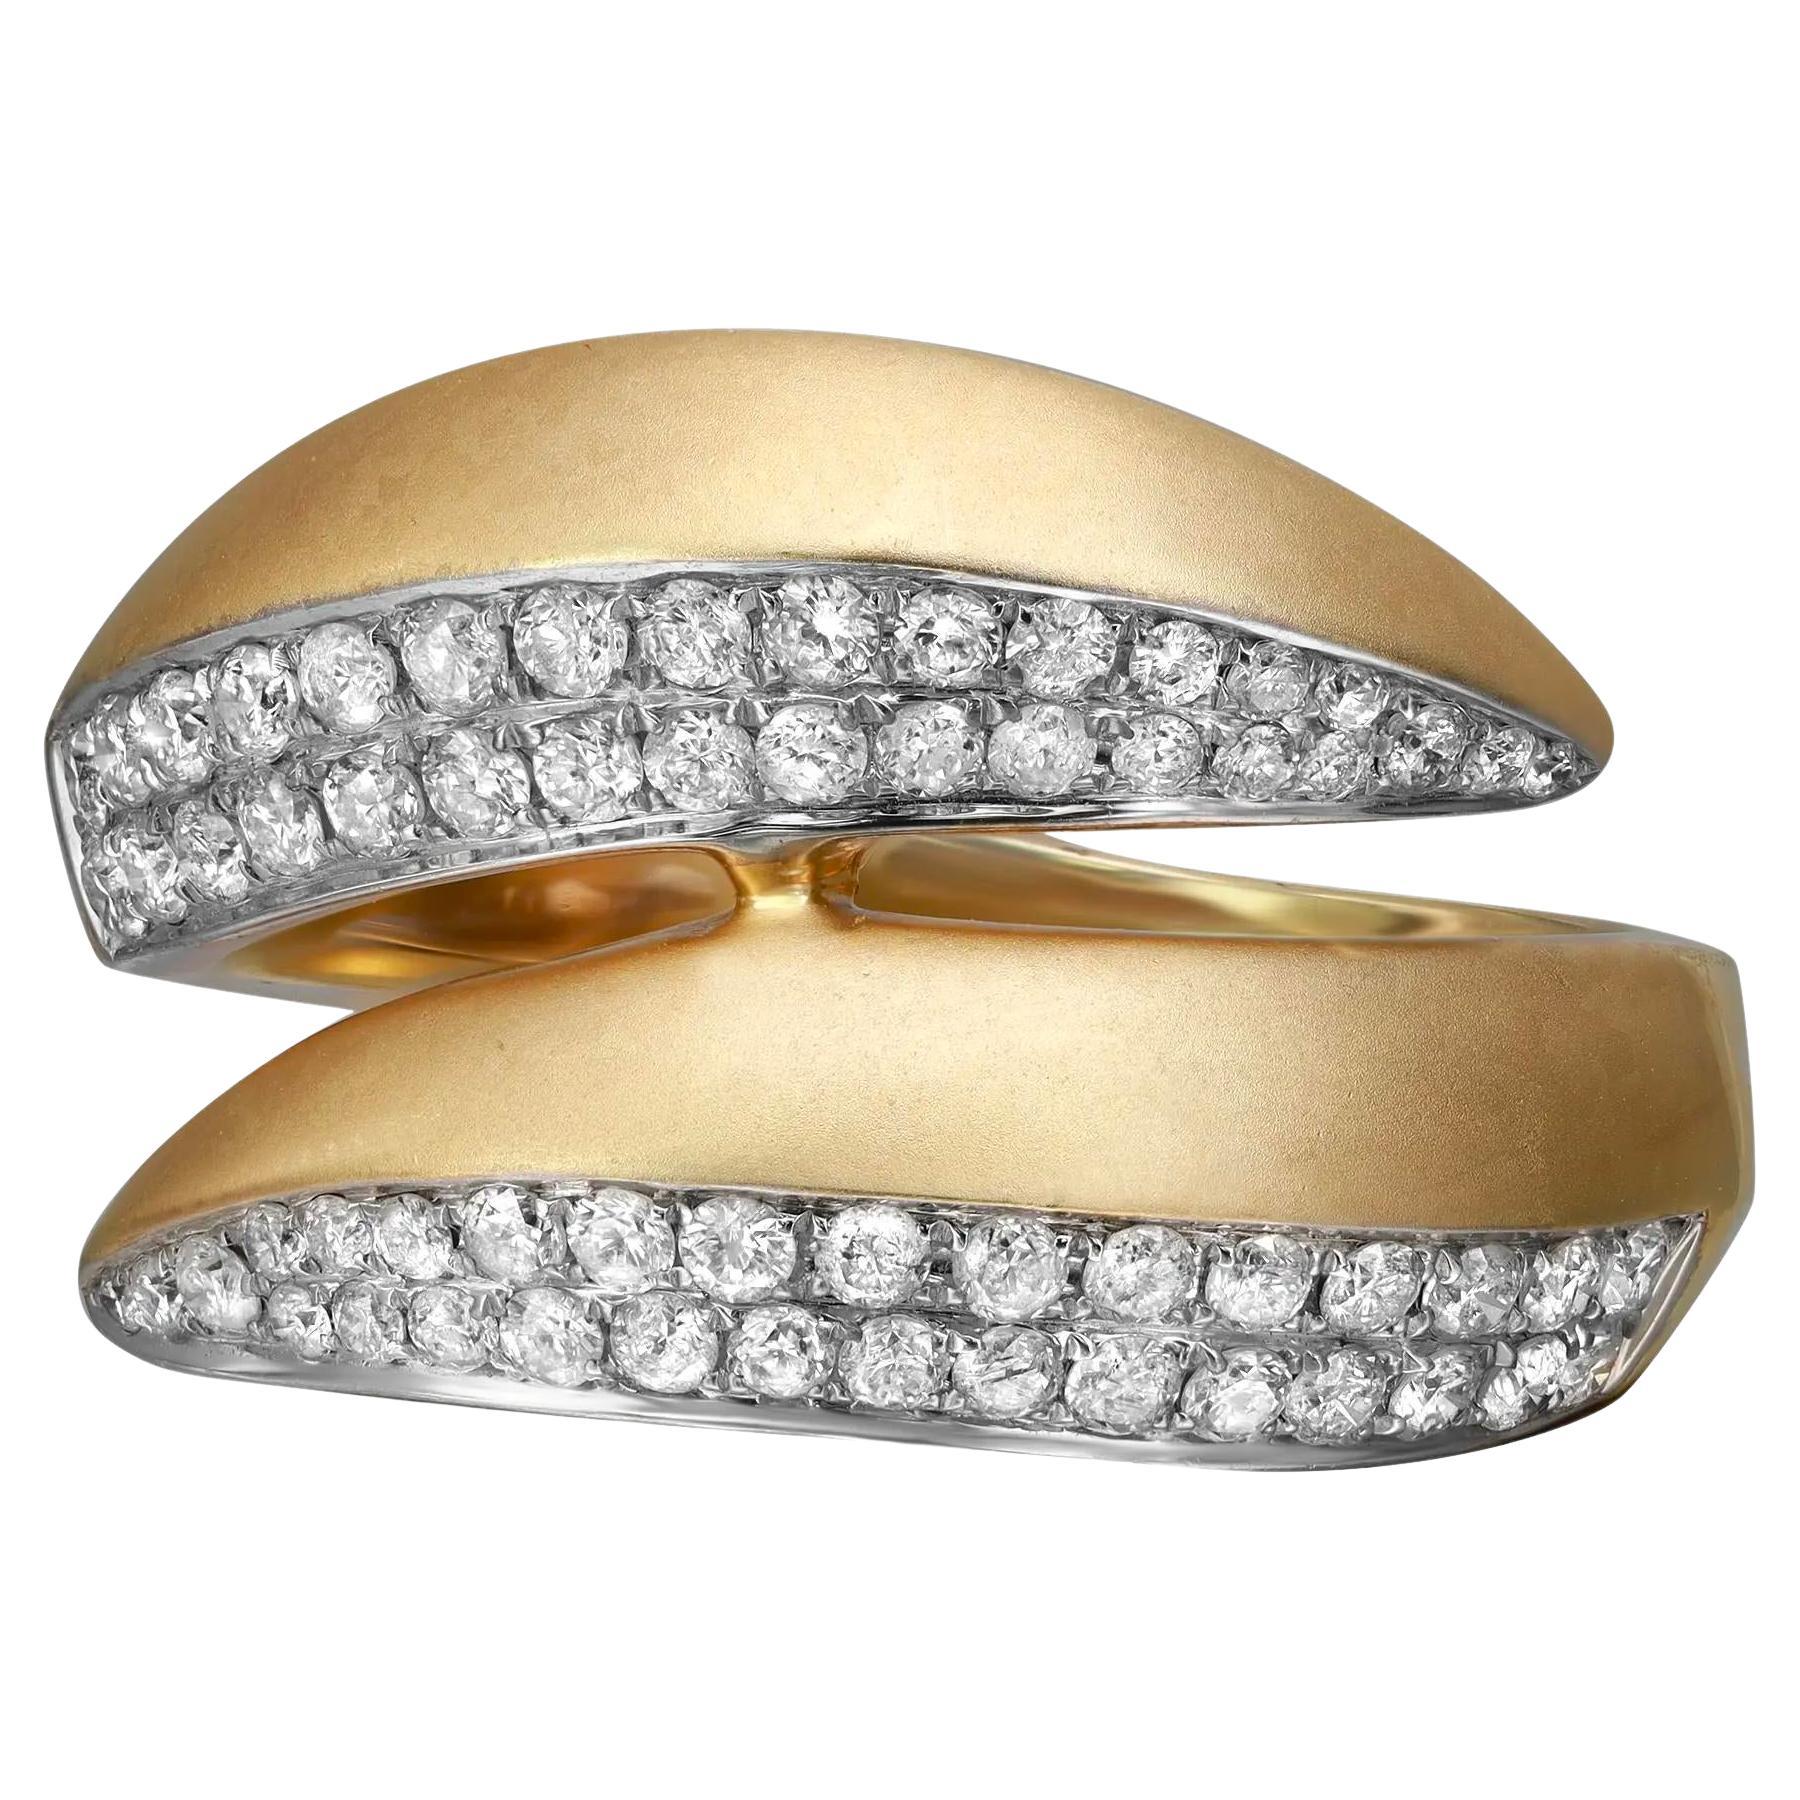 0.69cttw Pave Set Round Cut Diamond Ladies Cocktail Ring 14k Yellow Gold For Sale